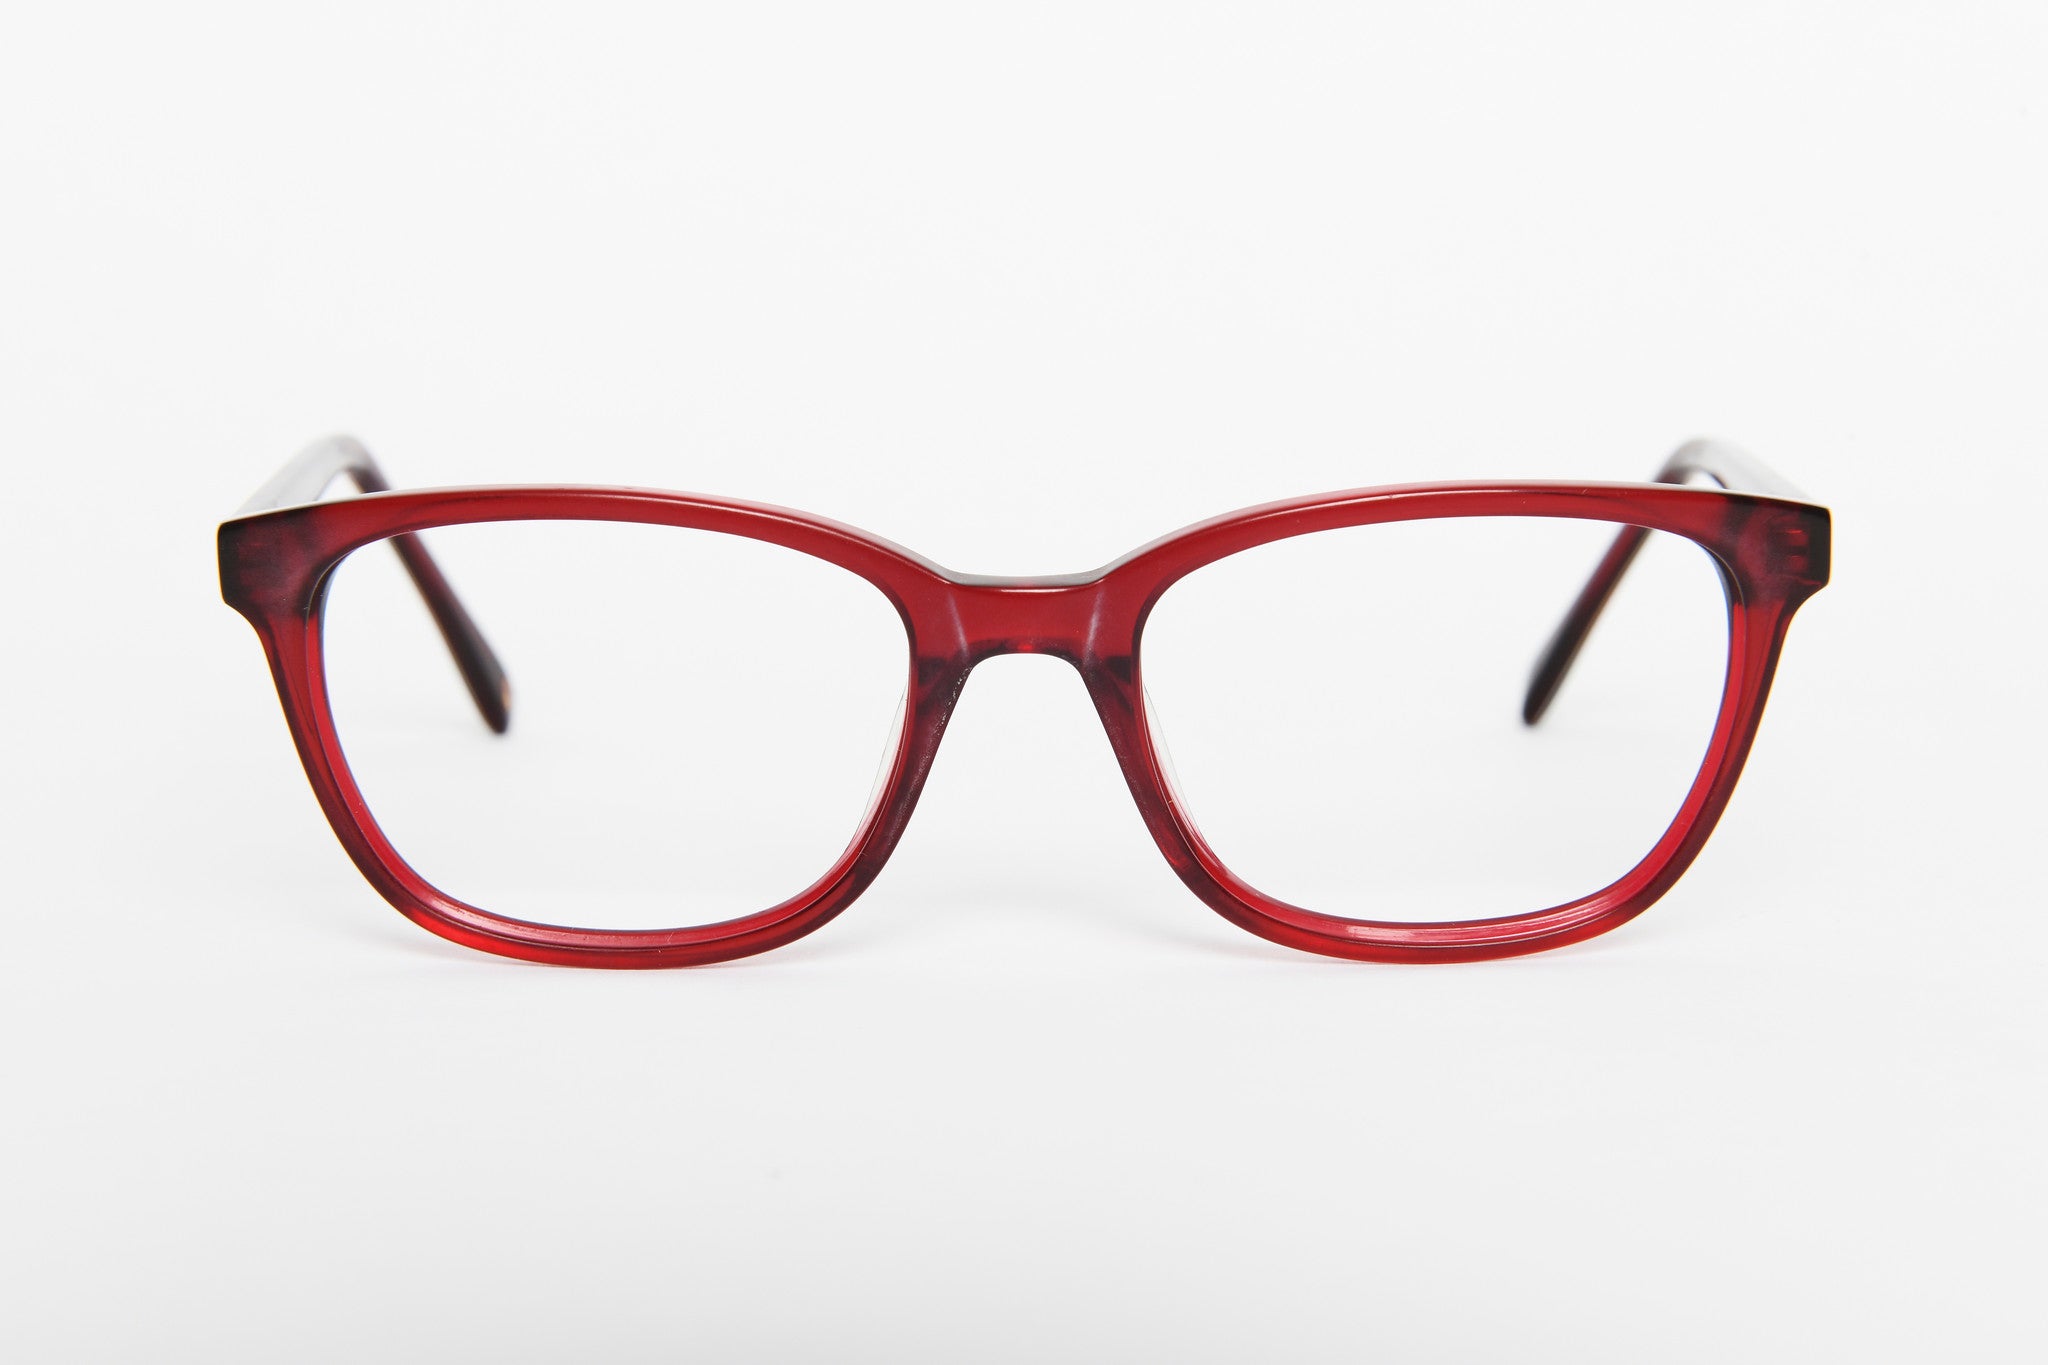 Joules red designer glasses. Joules women's glasses. Designer women's glasses. Cheap designer glasses. Sustainable eyewear.